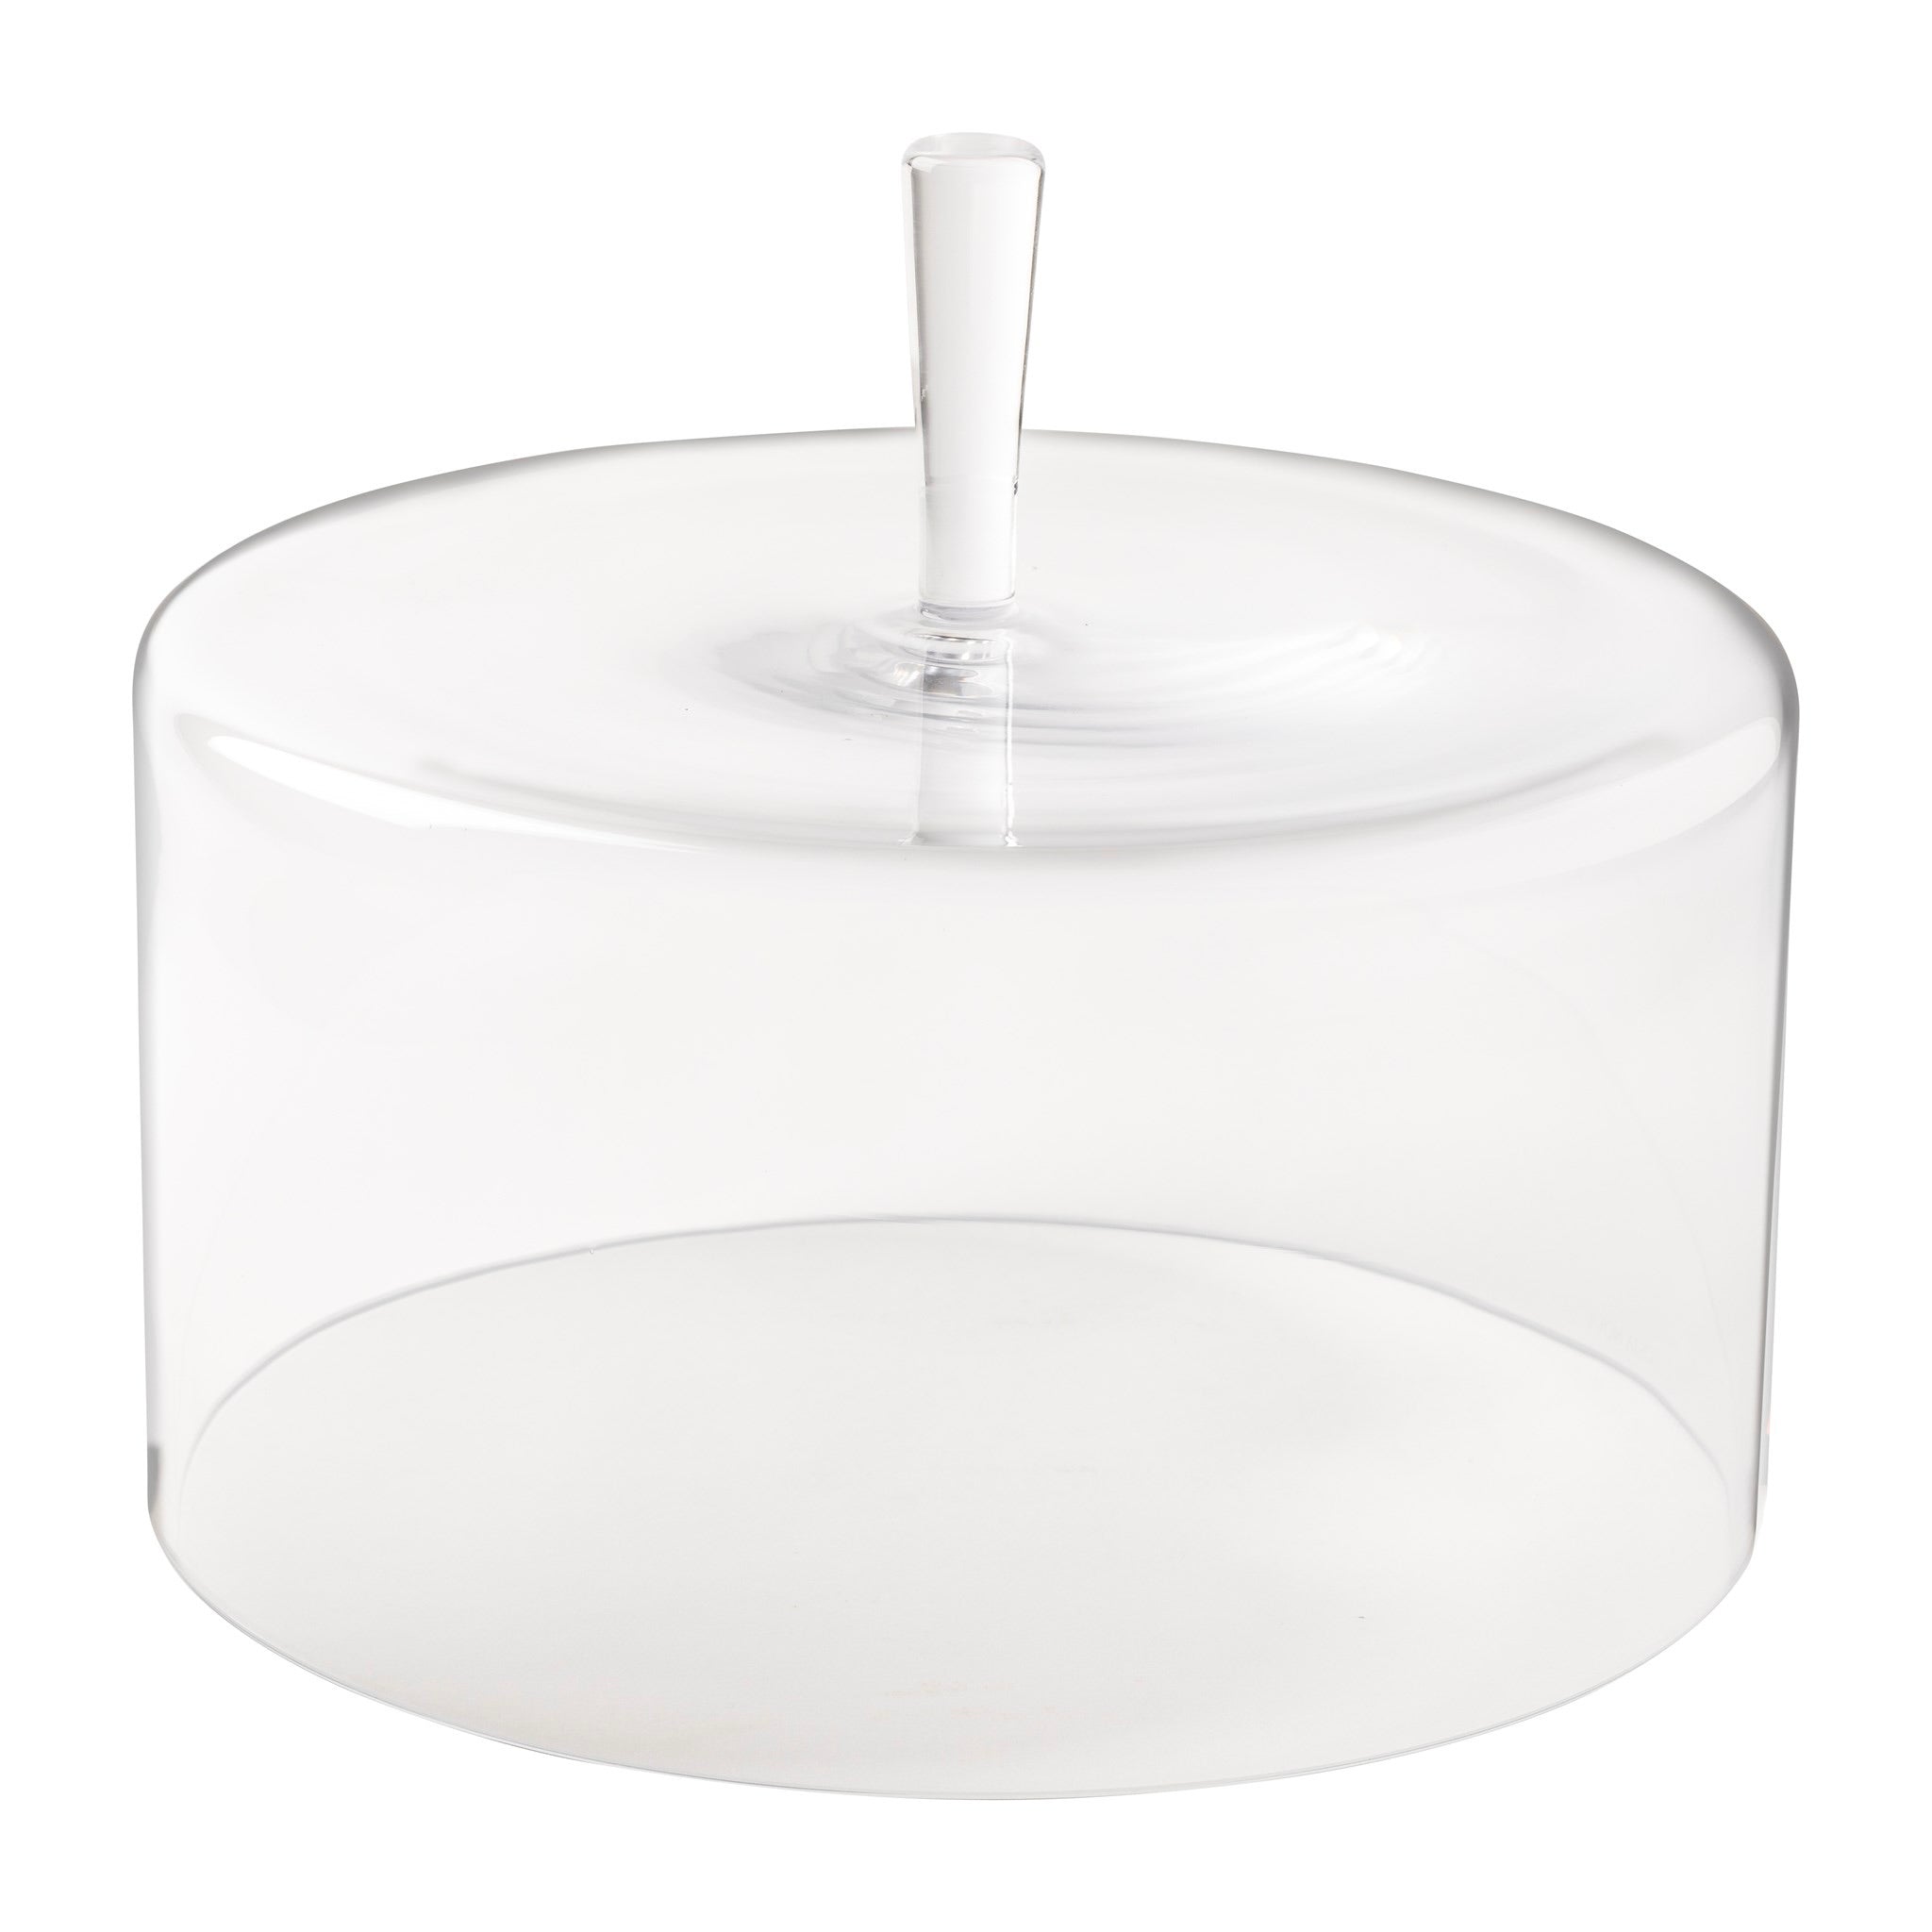 Coupole Glass Dome - 2 sizes